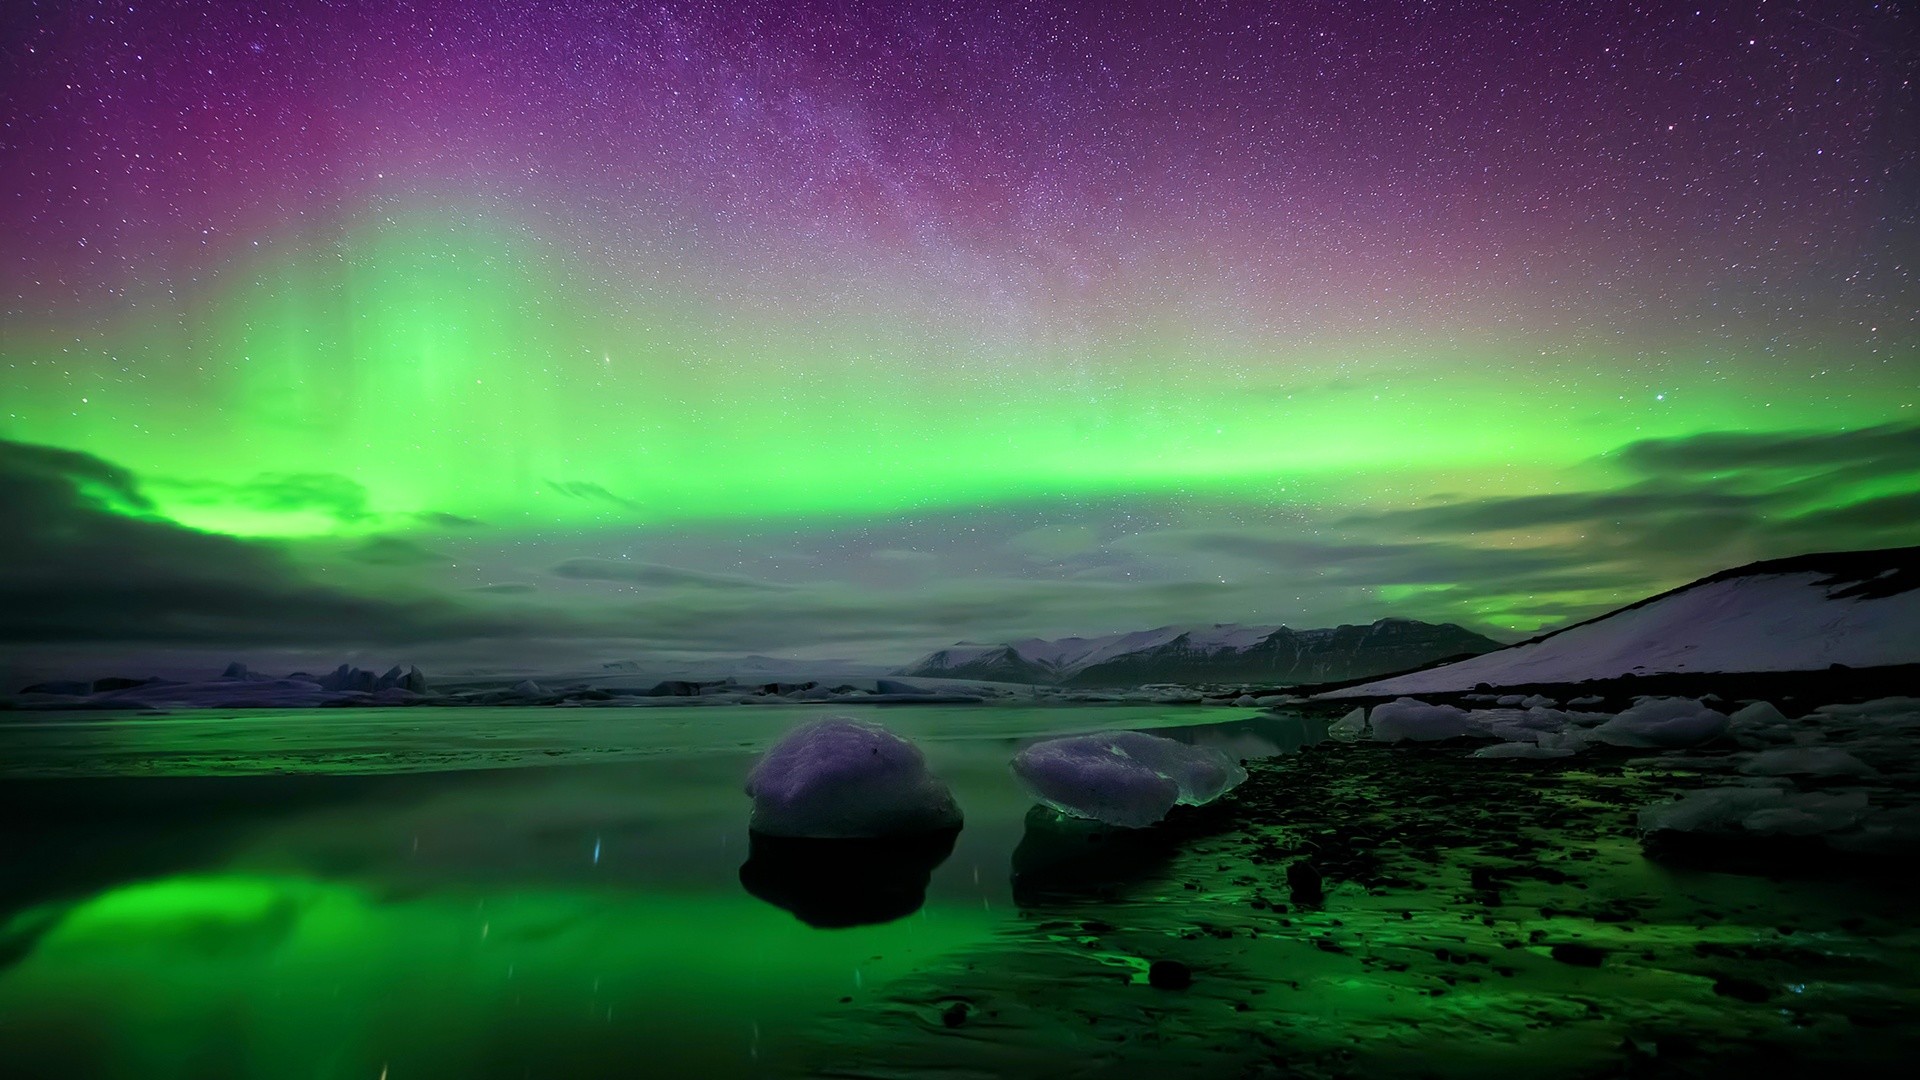 Aurora wallpapers for 4k, 1080p hd and 720p hd resolutions and are best sui...